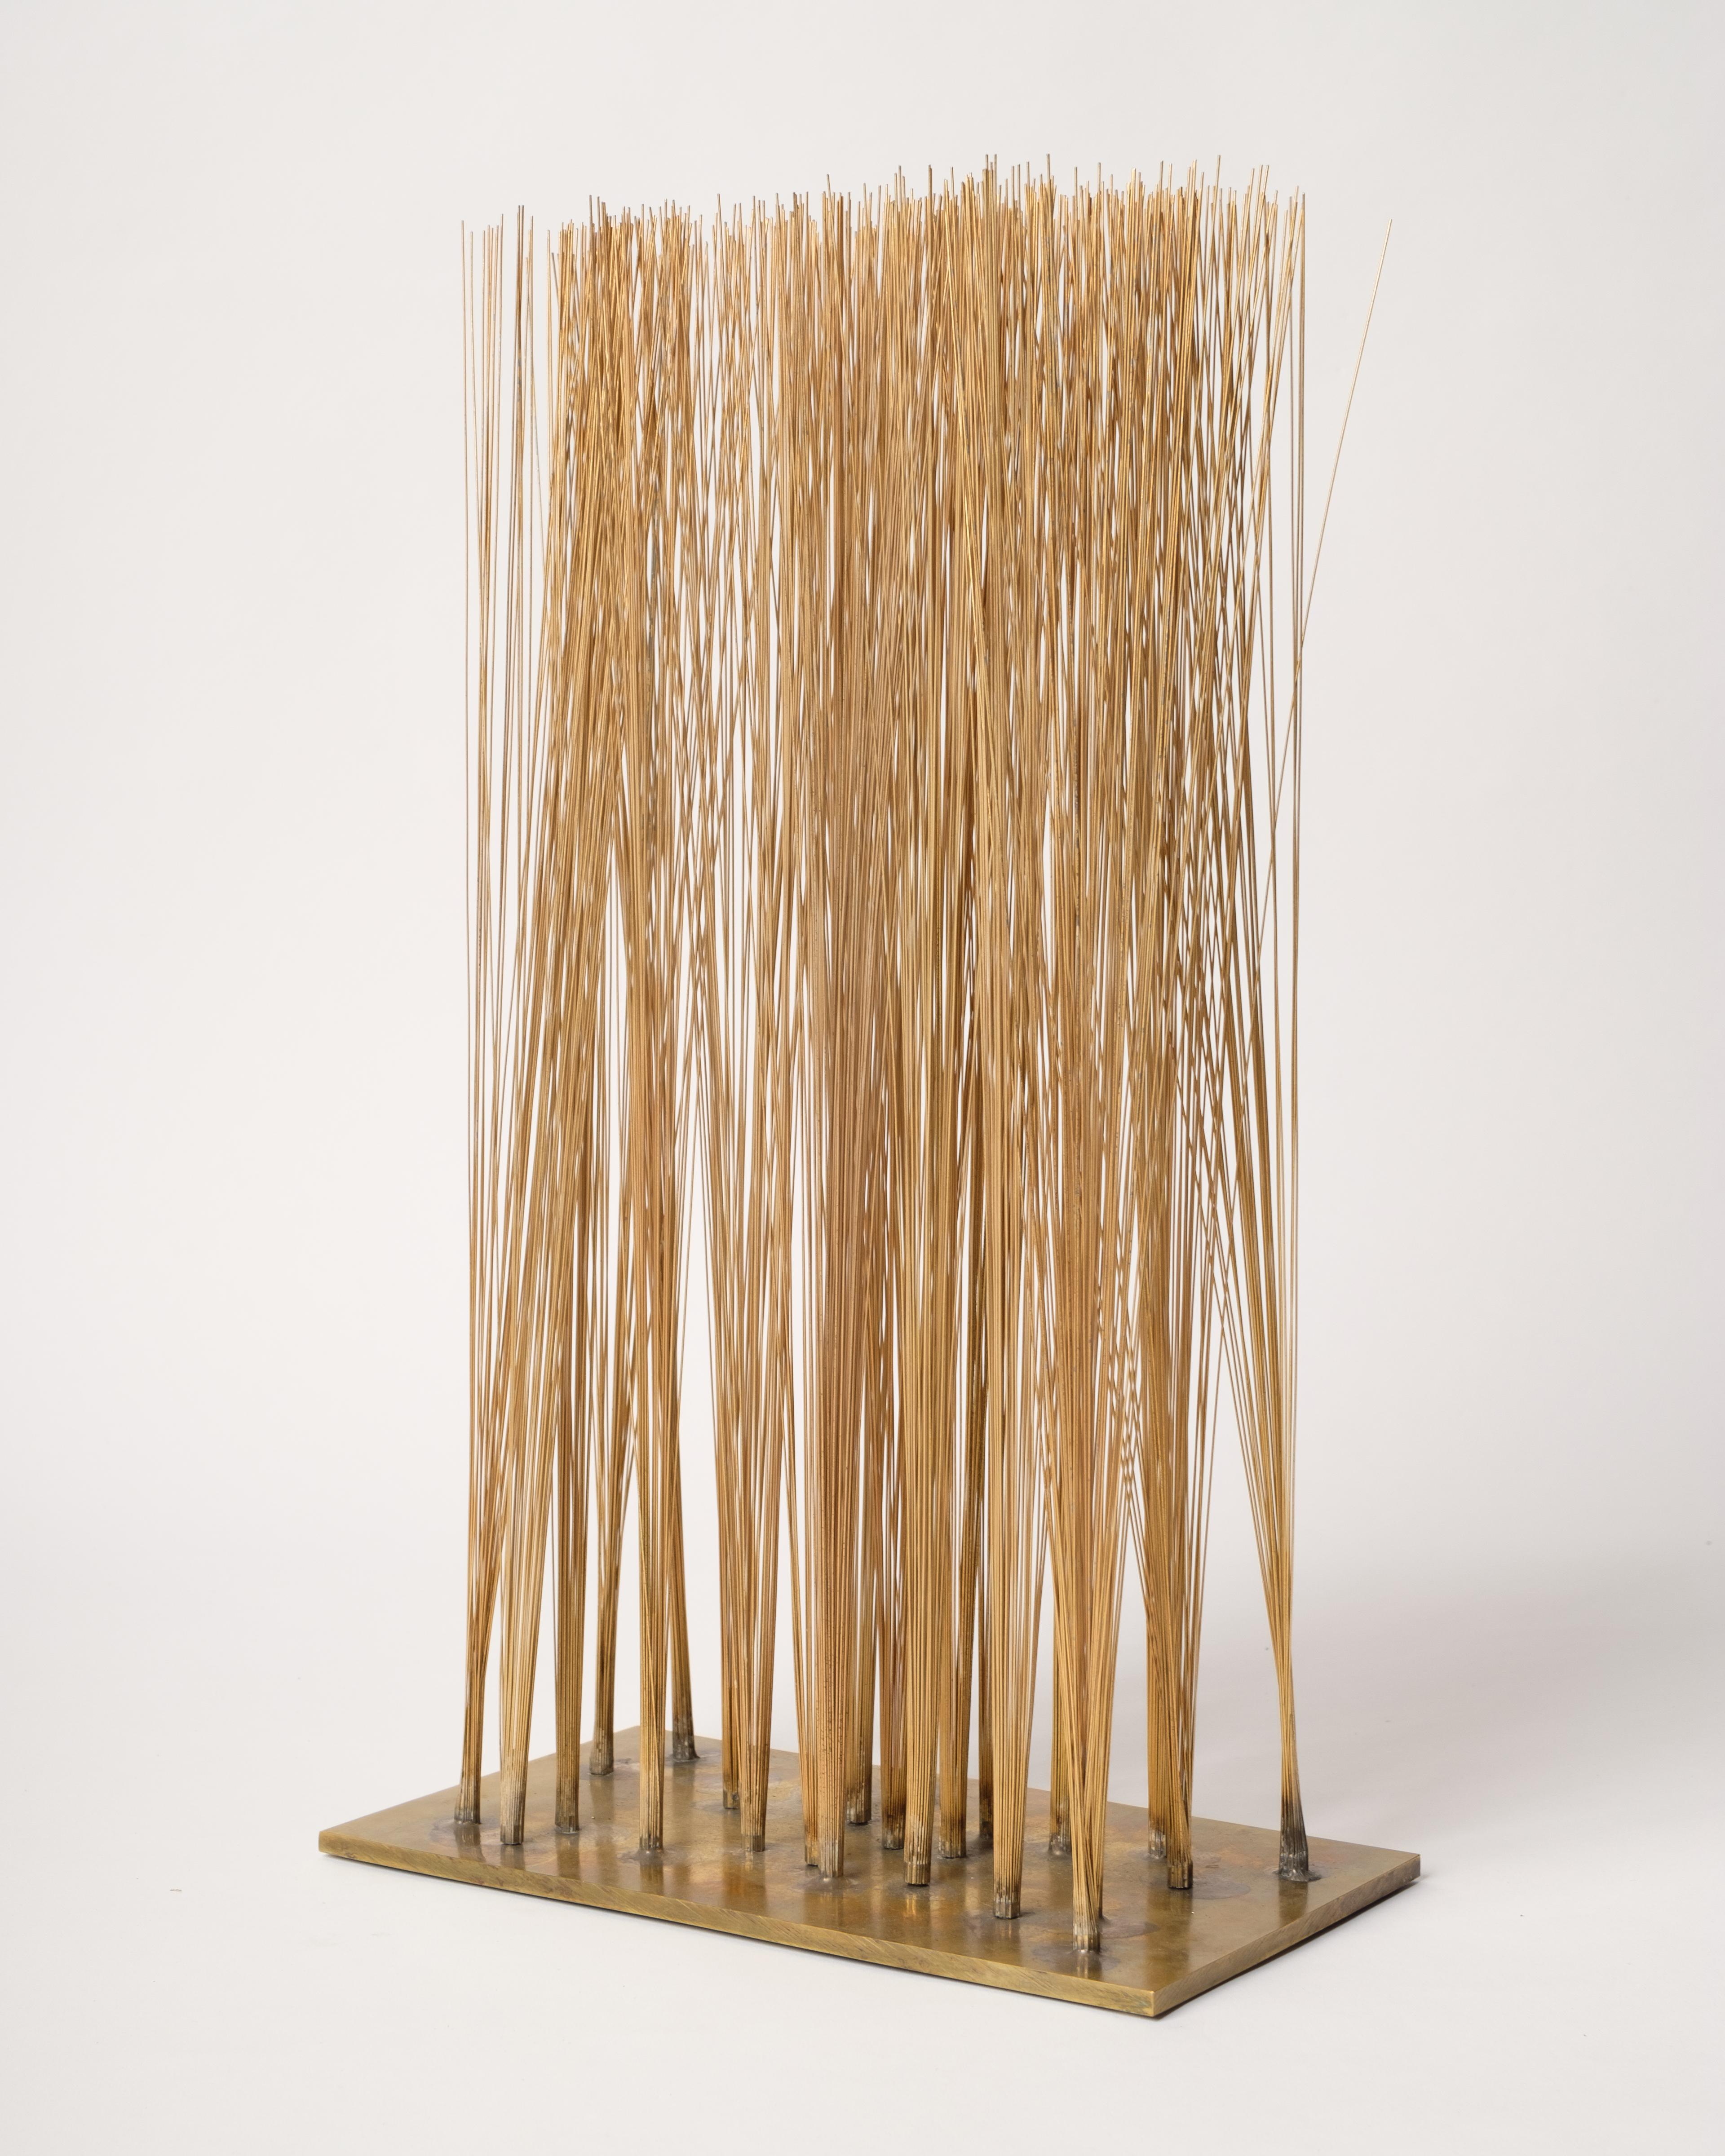 Untitled (Wheat) - Sculpture by Harry Bertoia